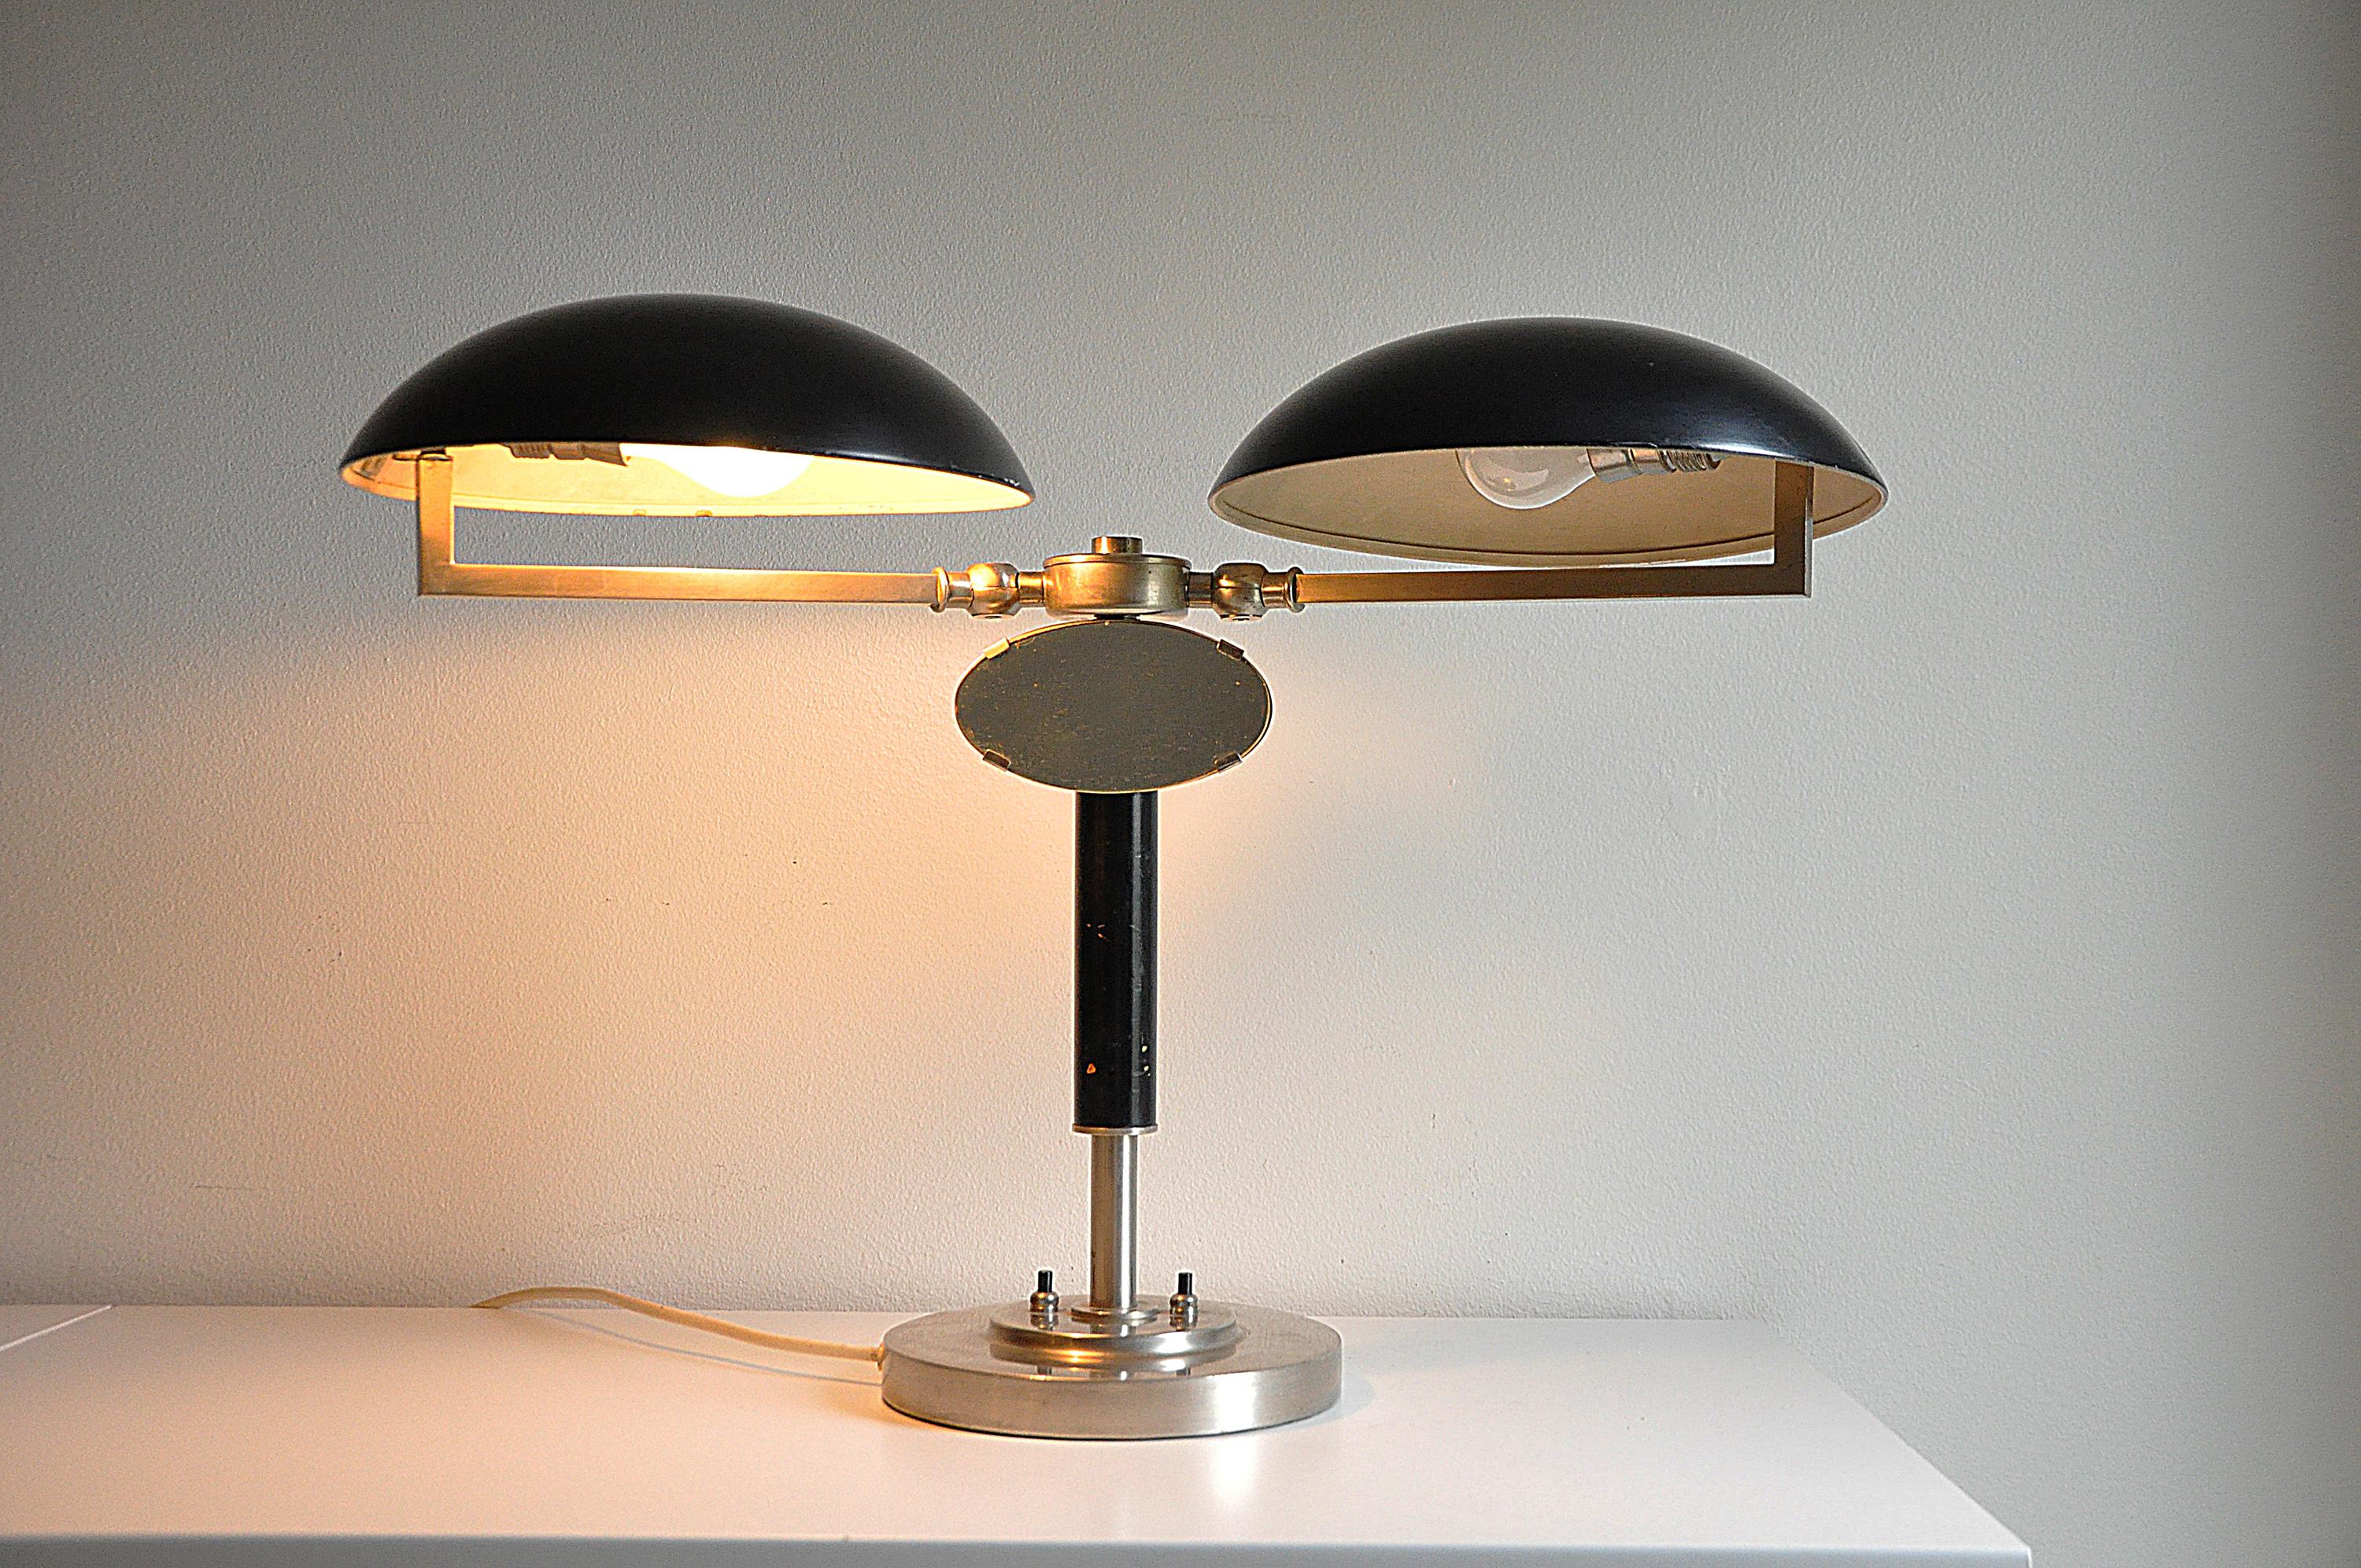 Steel Two-Arm Table Lamp with a Small Mirror, 1930s For Sale